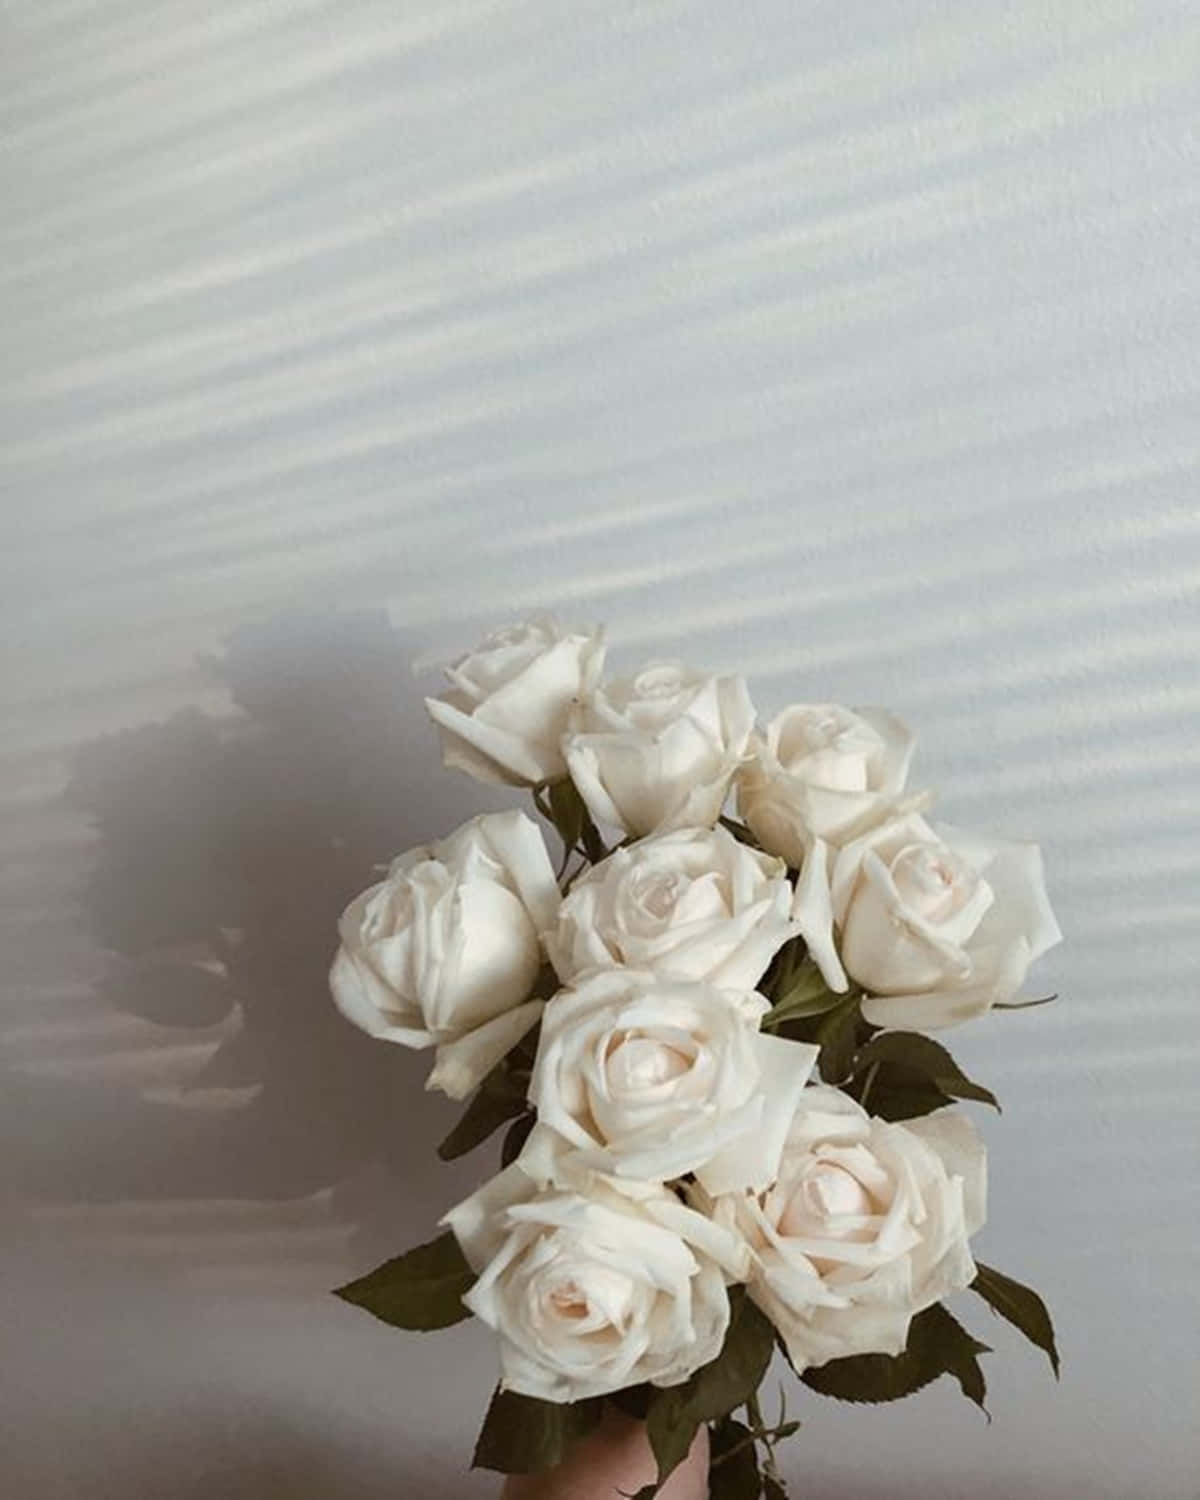 A beautiful white rose - a symbol of purity and perfection. Wallpaper